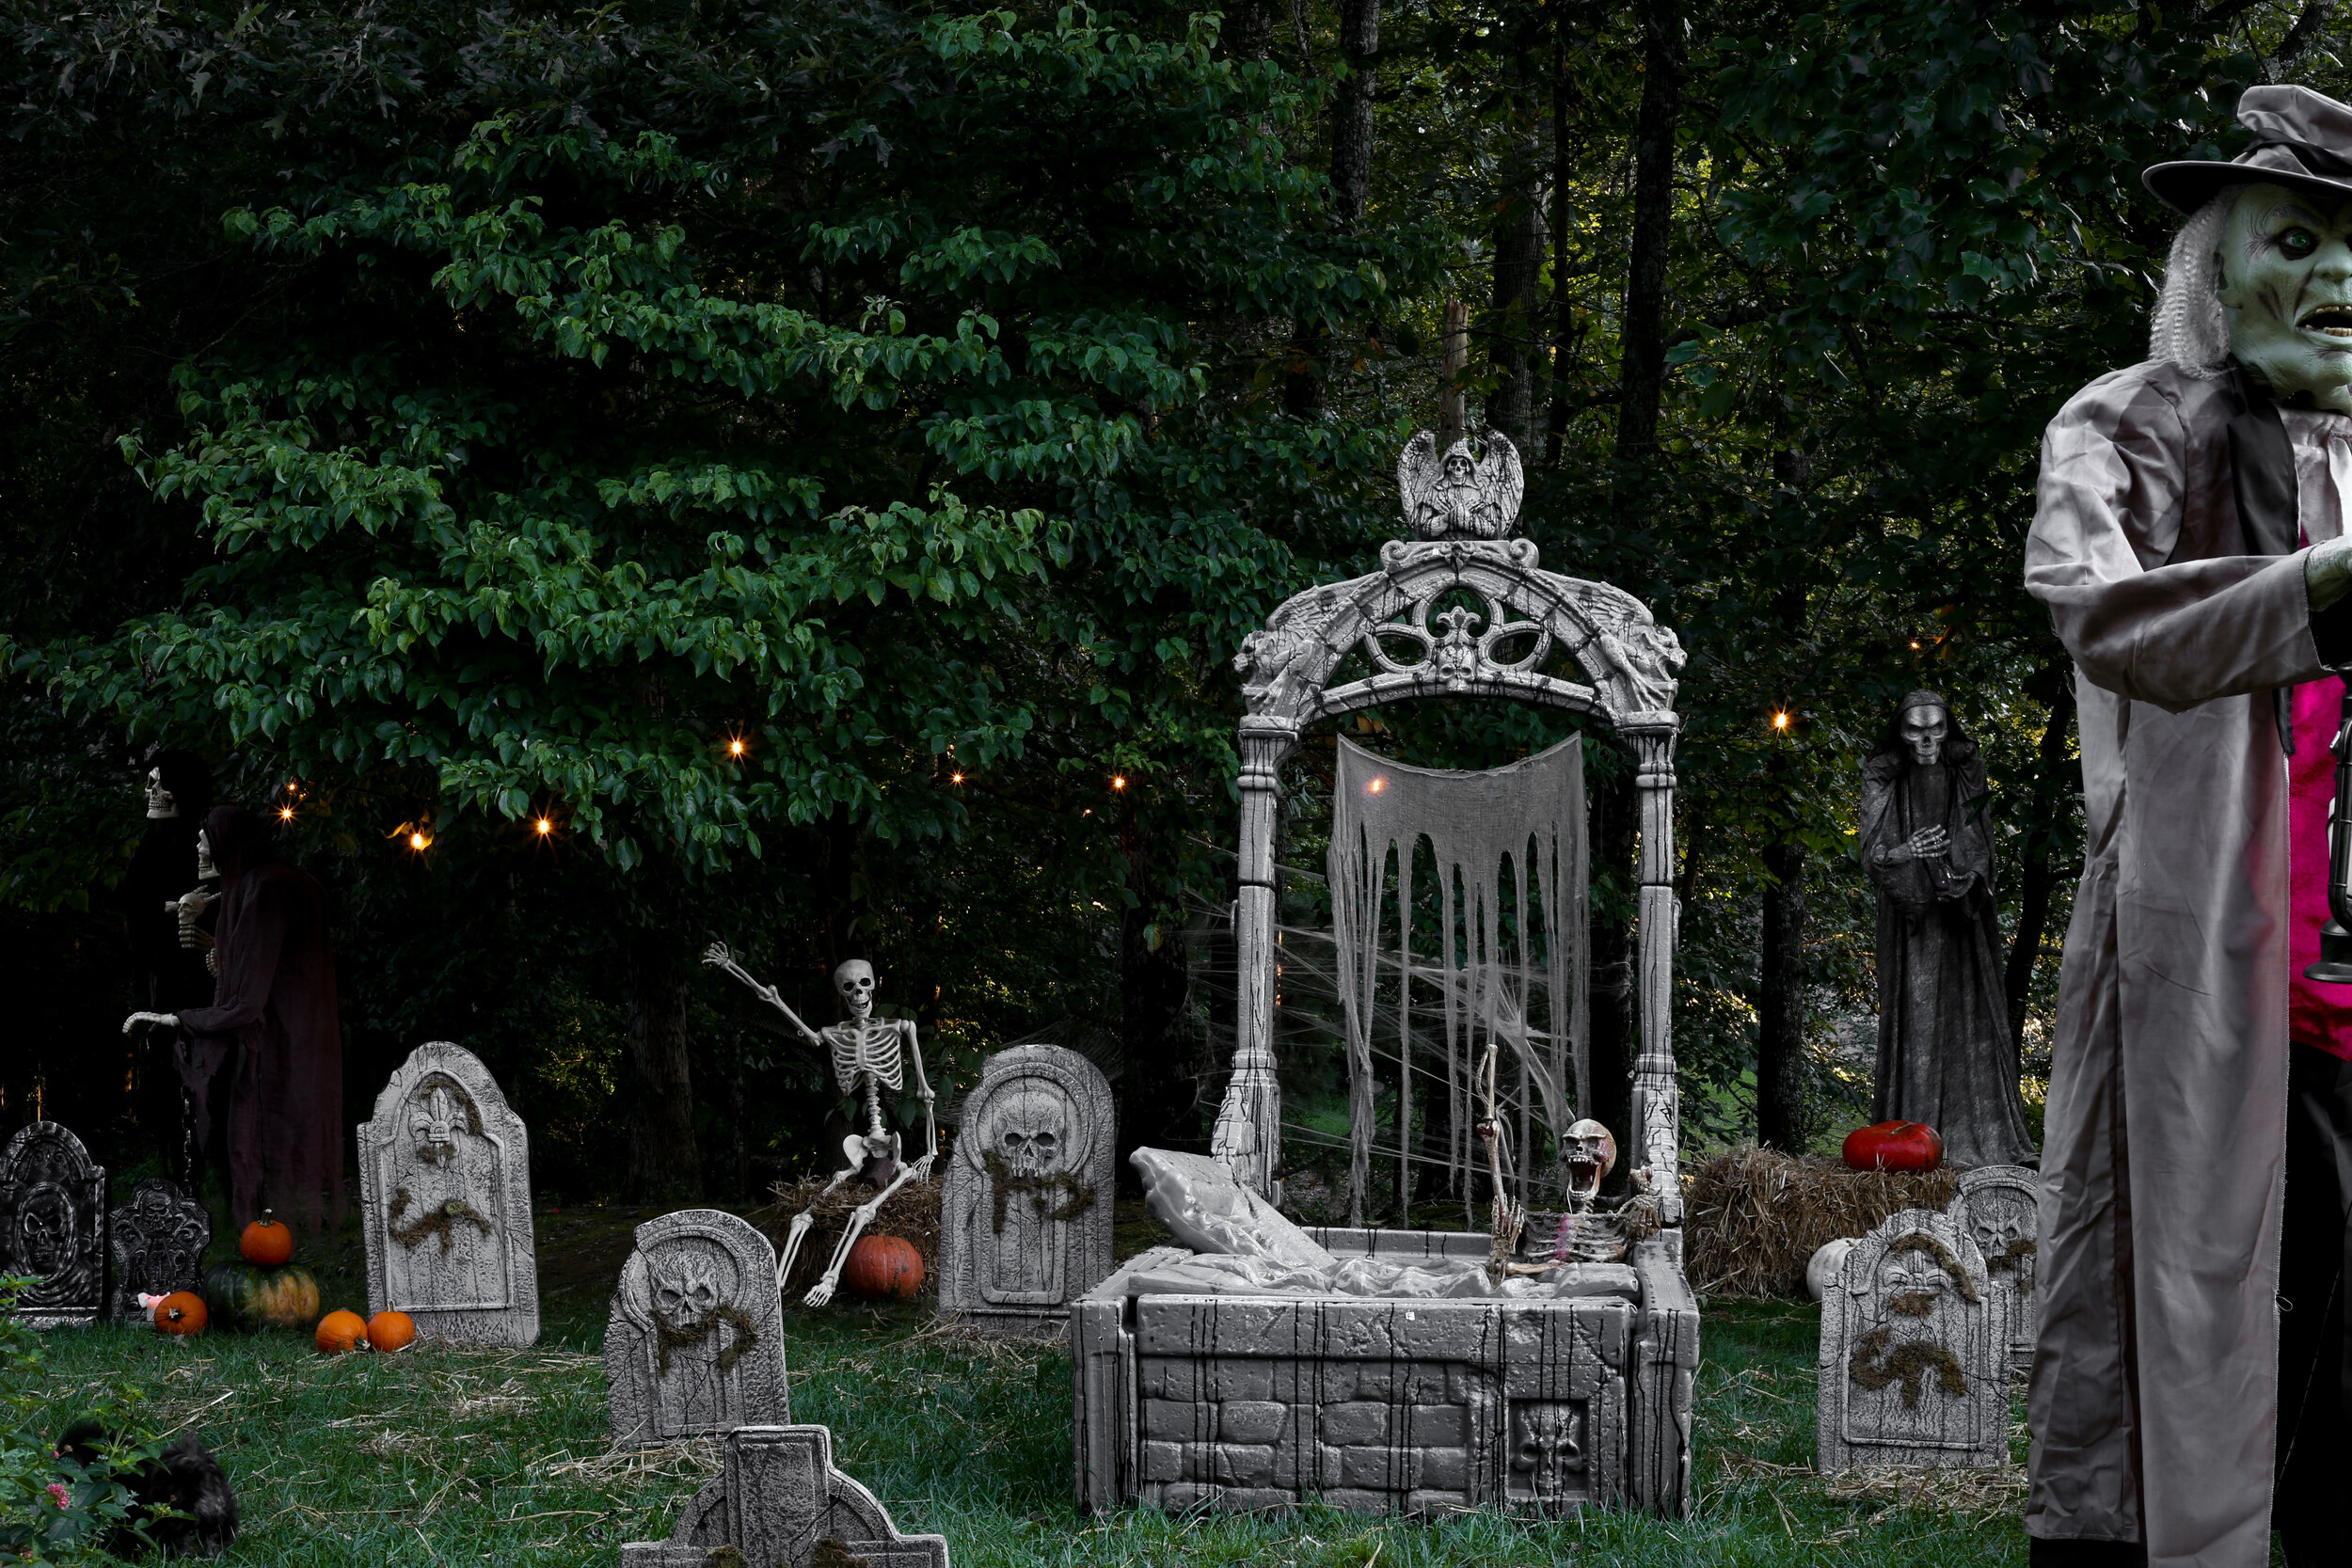 Spooky halloween decorations graveyard for a bone-chilling yard display